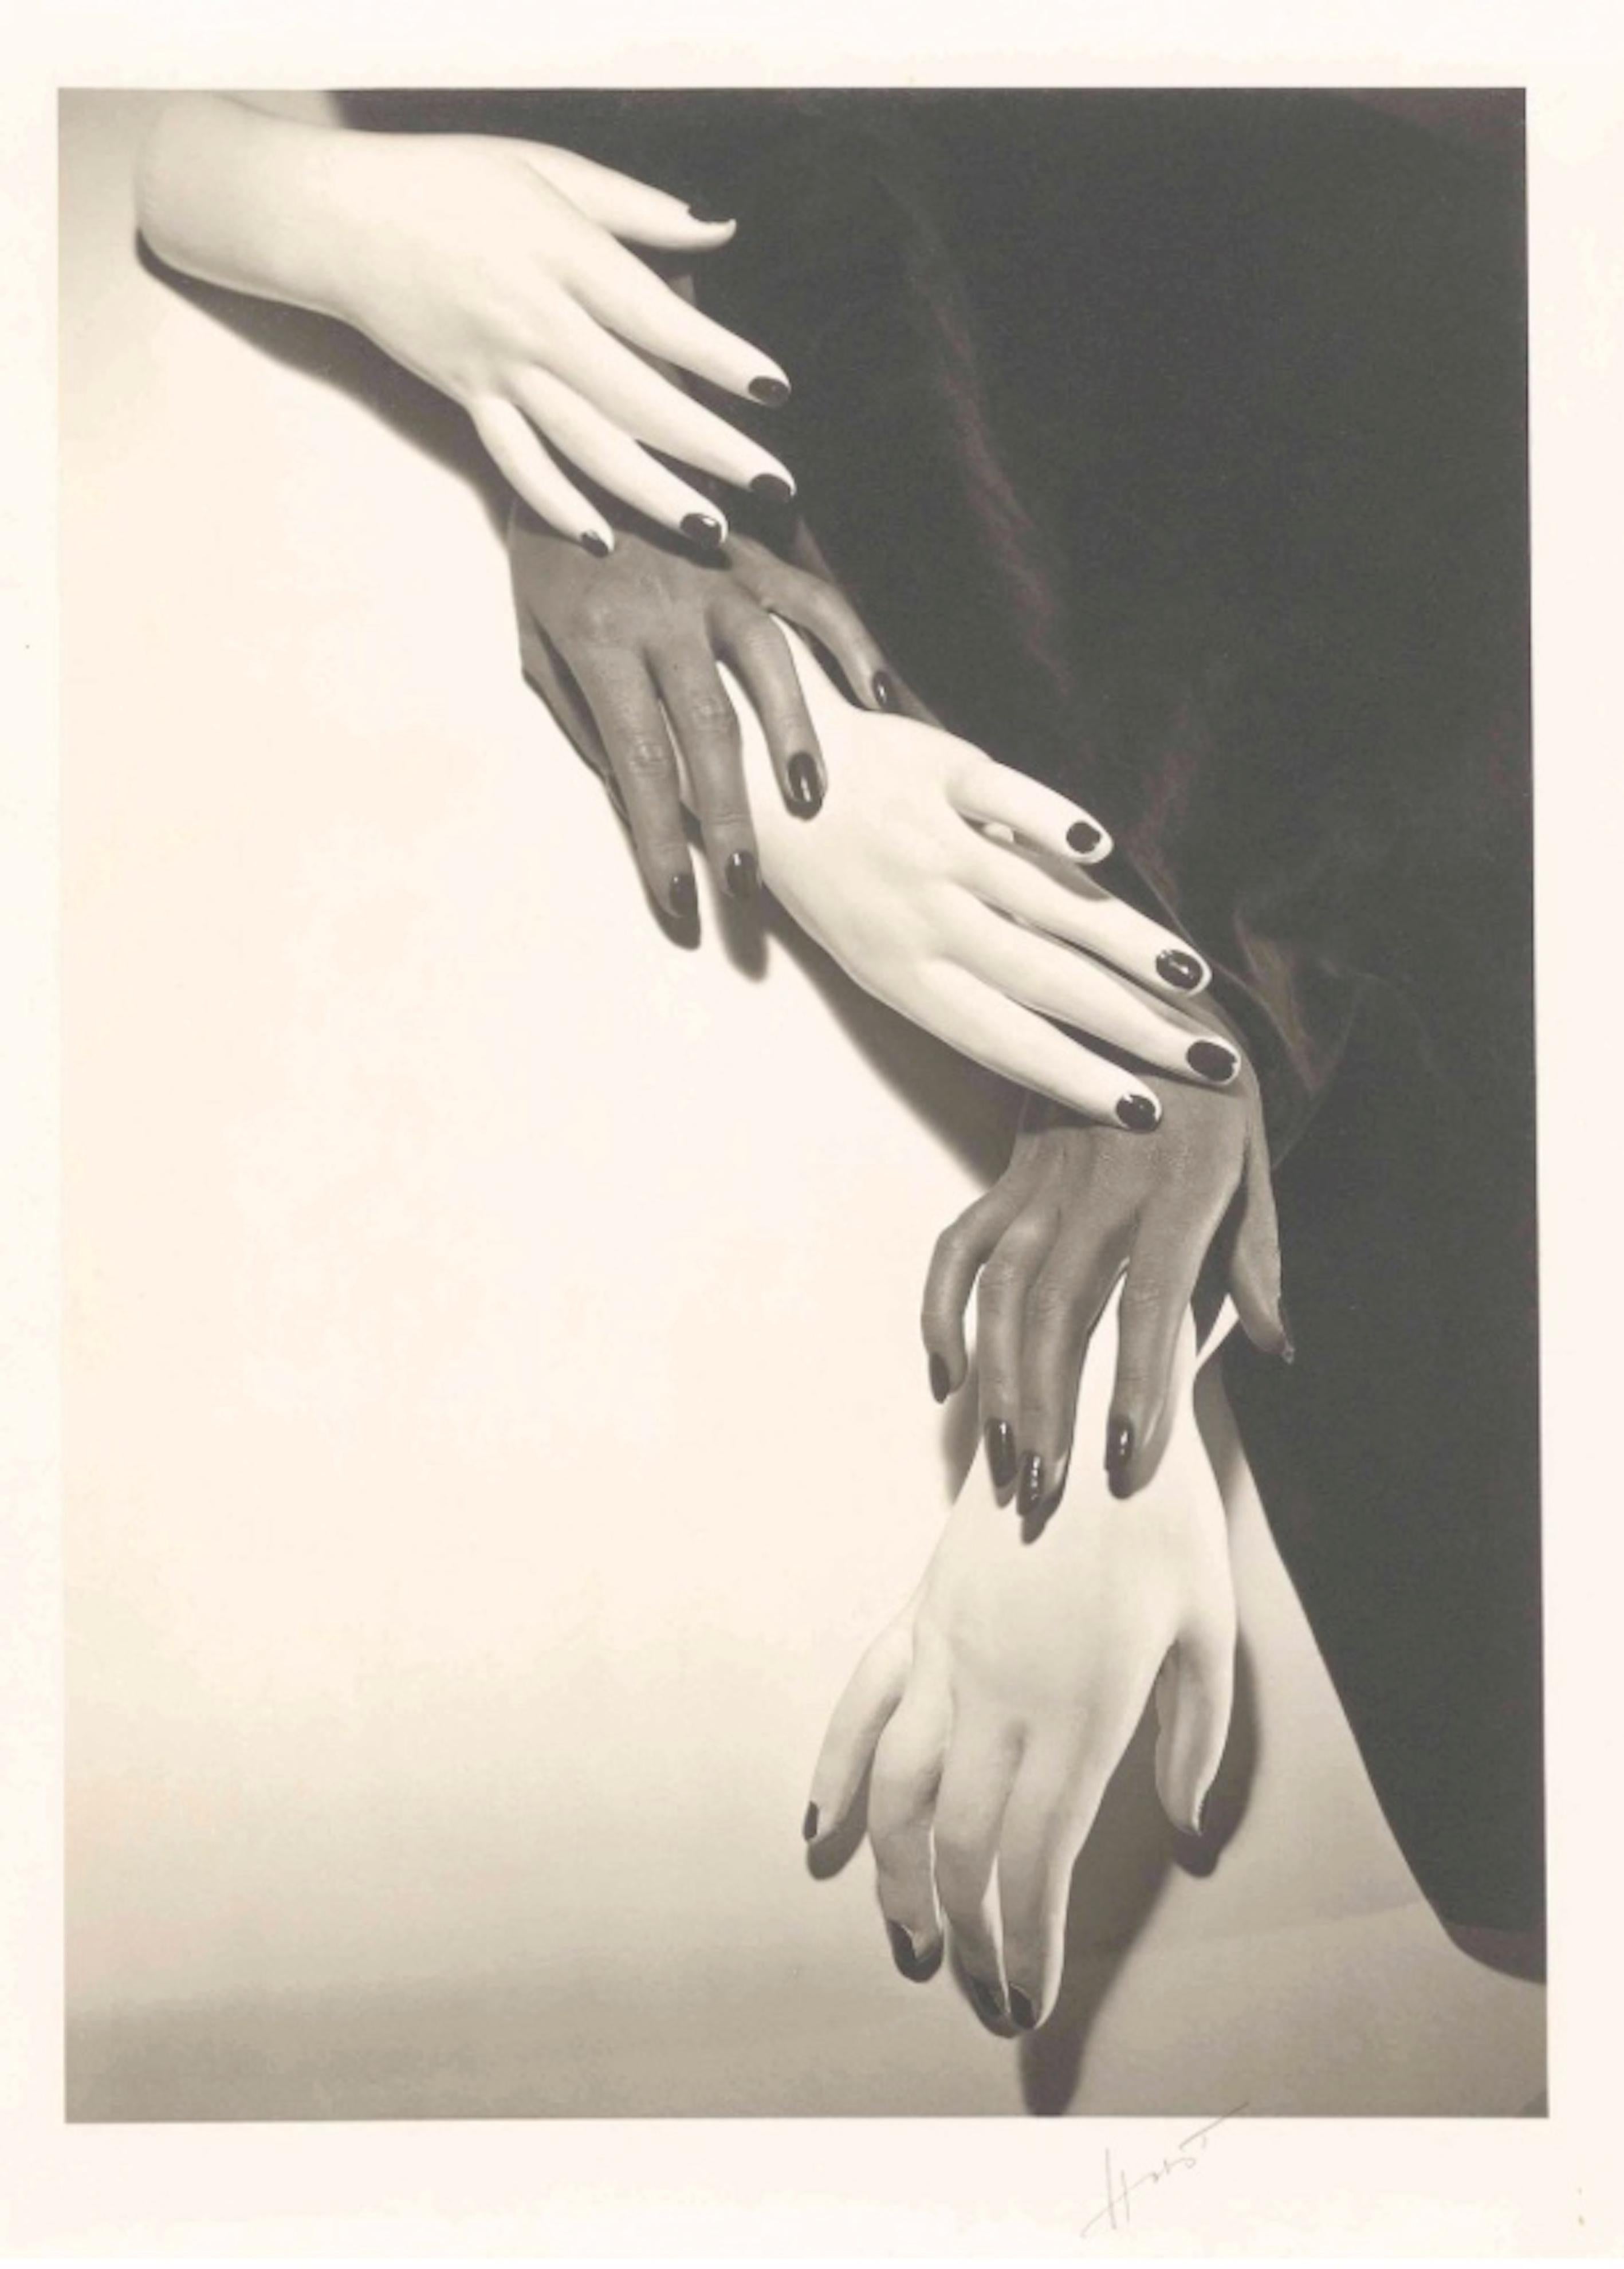 Horst P. Horst Black and White Photograph - Hands, Hands, Hands, New York , 1941